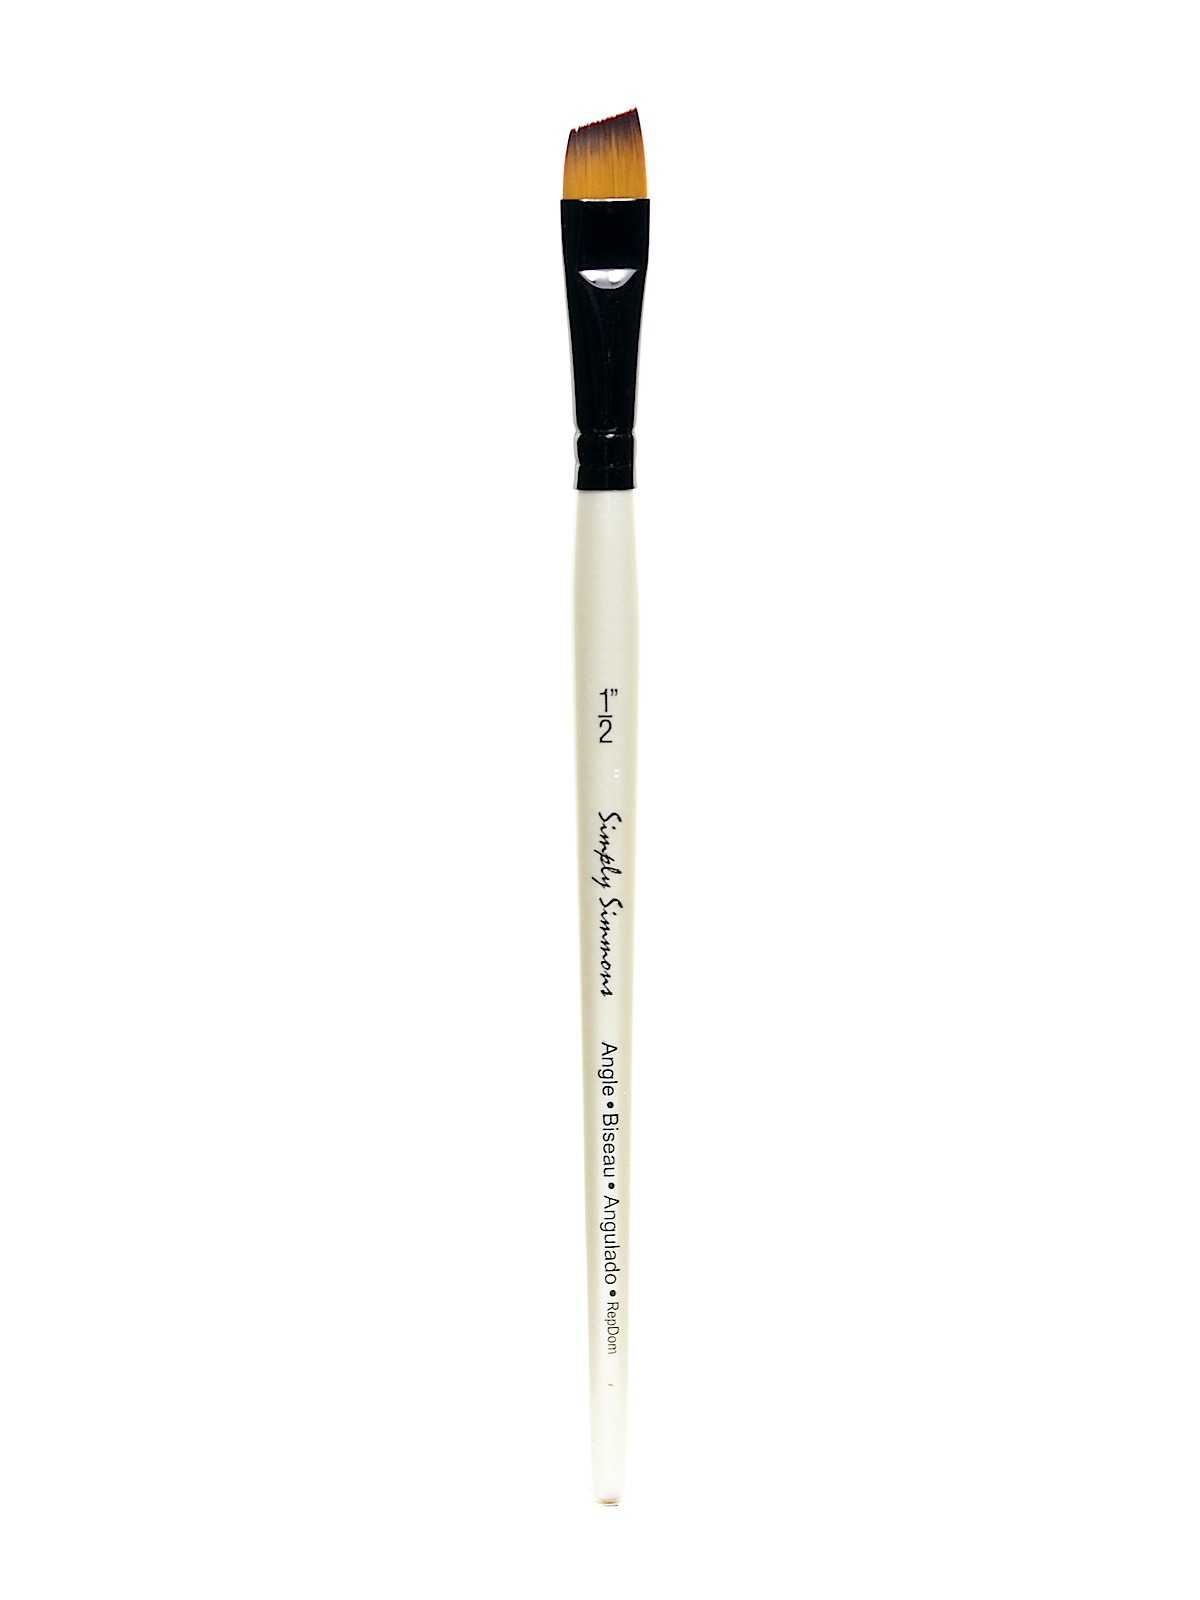 Simply Simmons Short Handle Brushes Angle Shader 1 2 In.